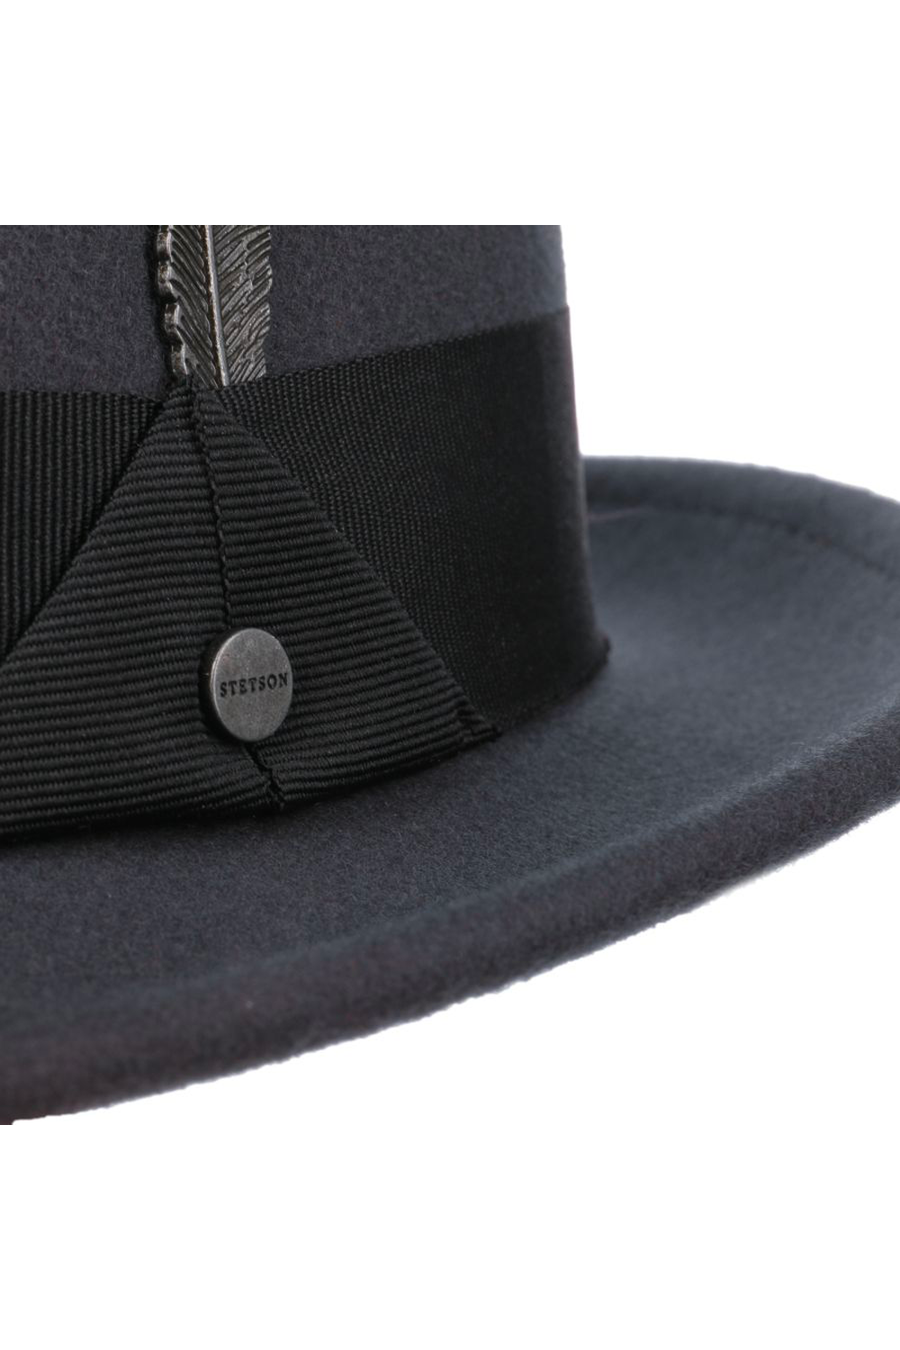 Buy the Stetson Vencaster Player Wool Hat Dark Grey at Intro. Spend £100 for free next day UK delivery. Official stockists. We ship worldwide